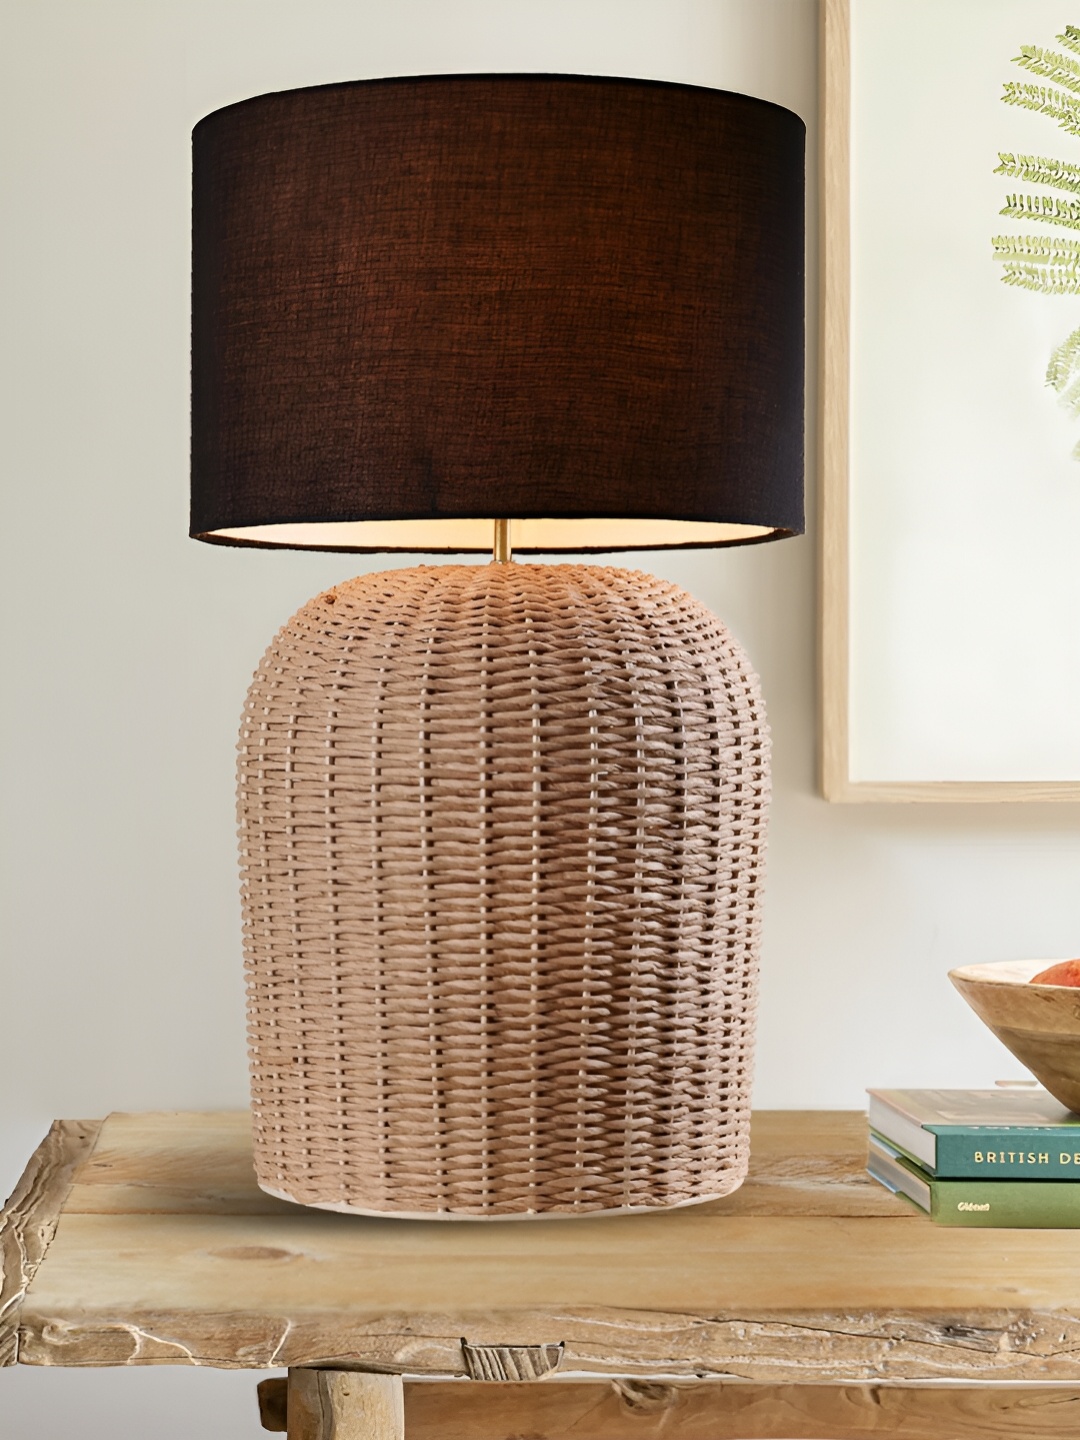 

Decazone Black Wood Square Table Lamp with Adjustable Cord